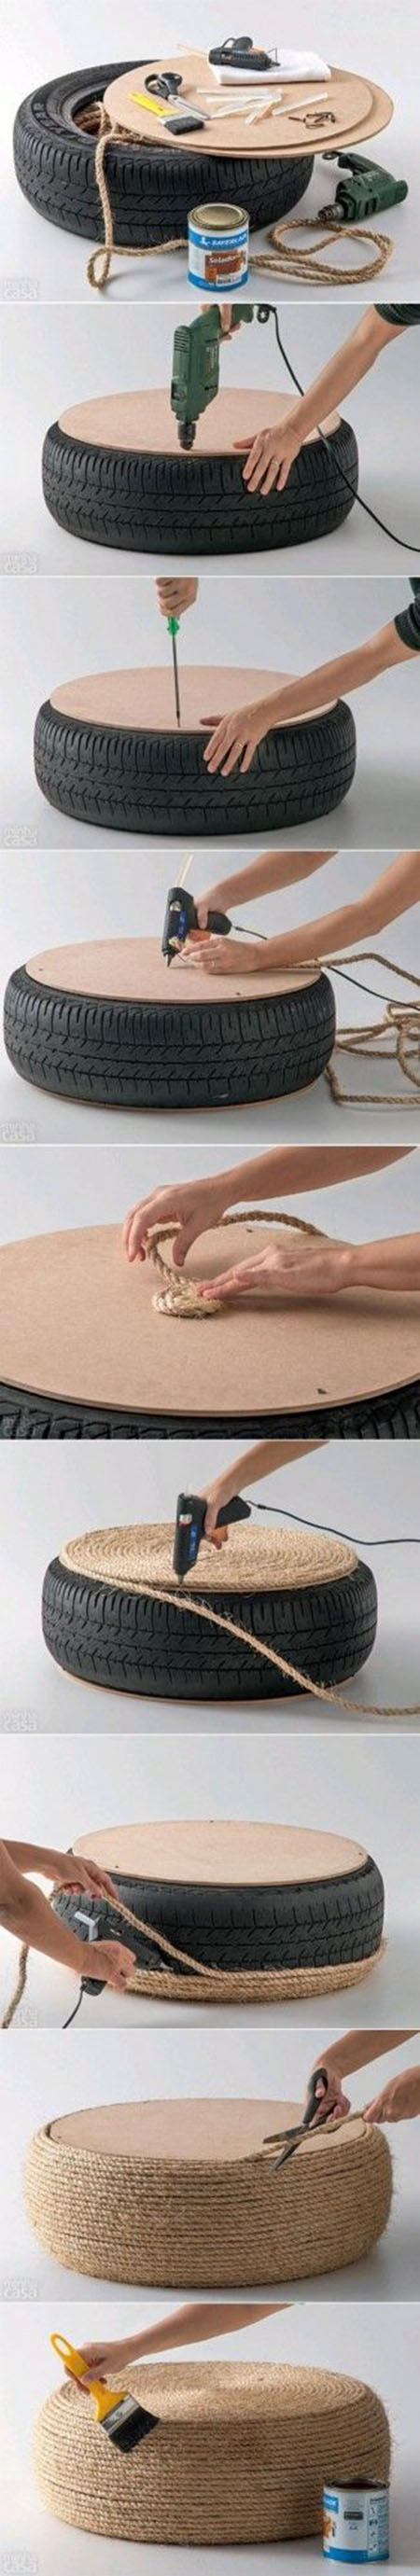 5 Insanely Clever DIY Projects05b43cd